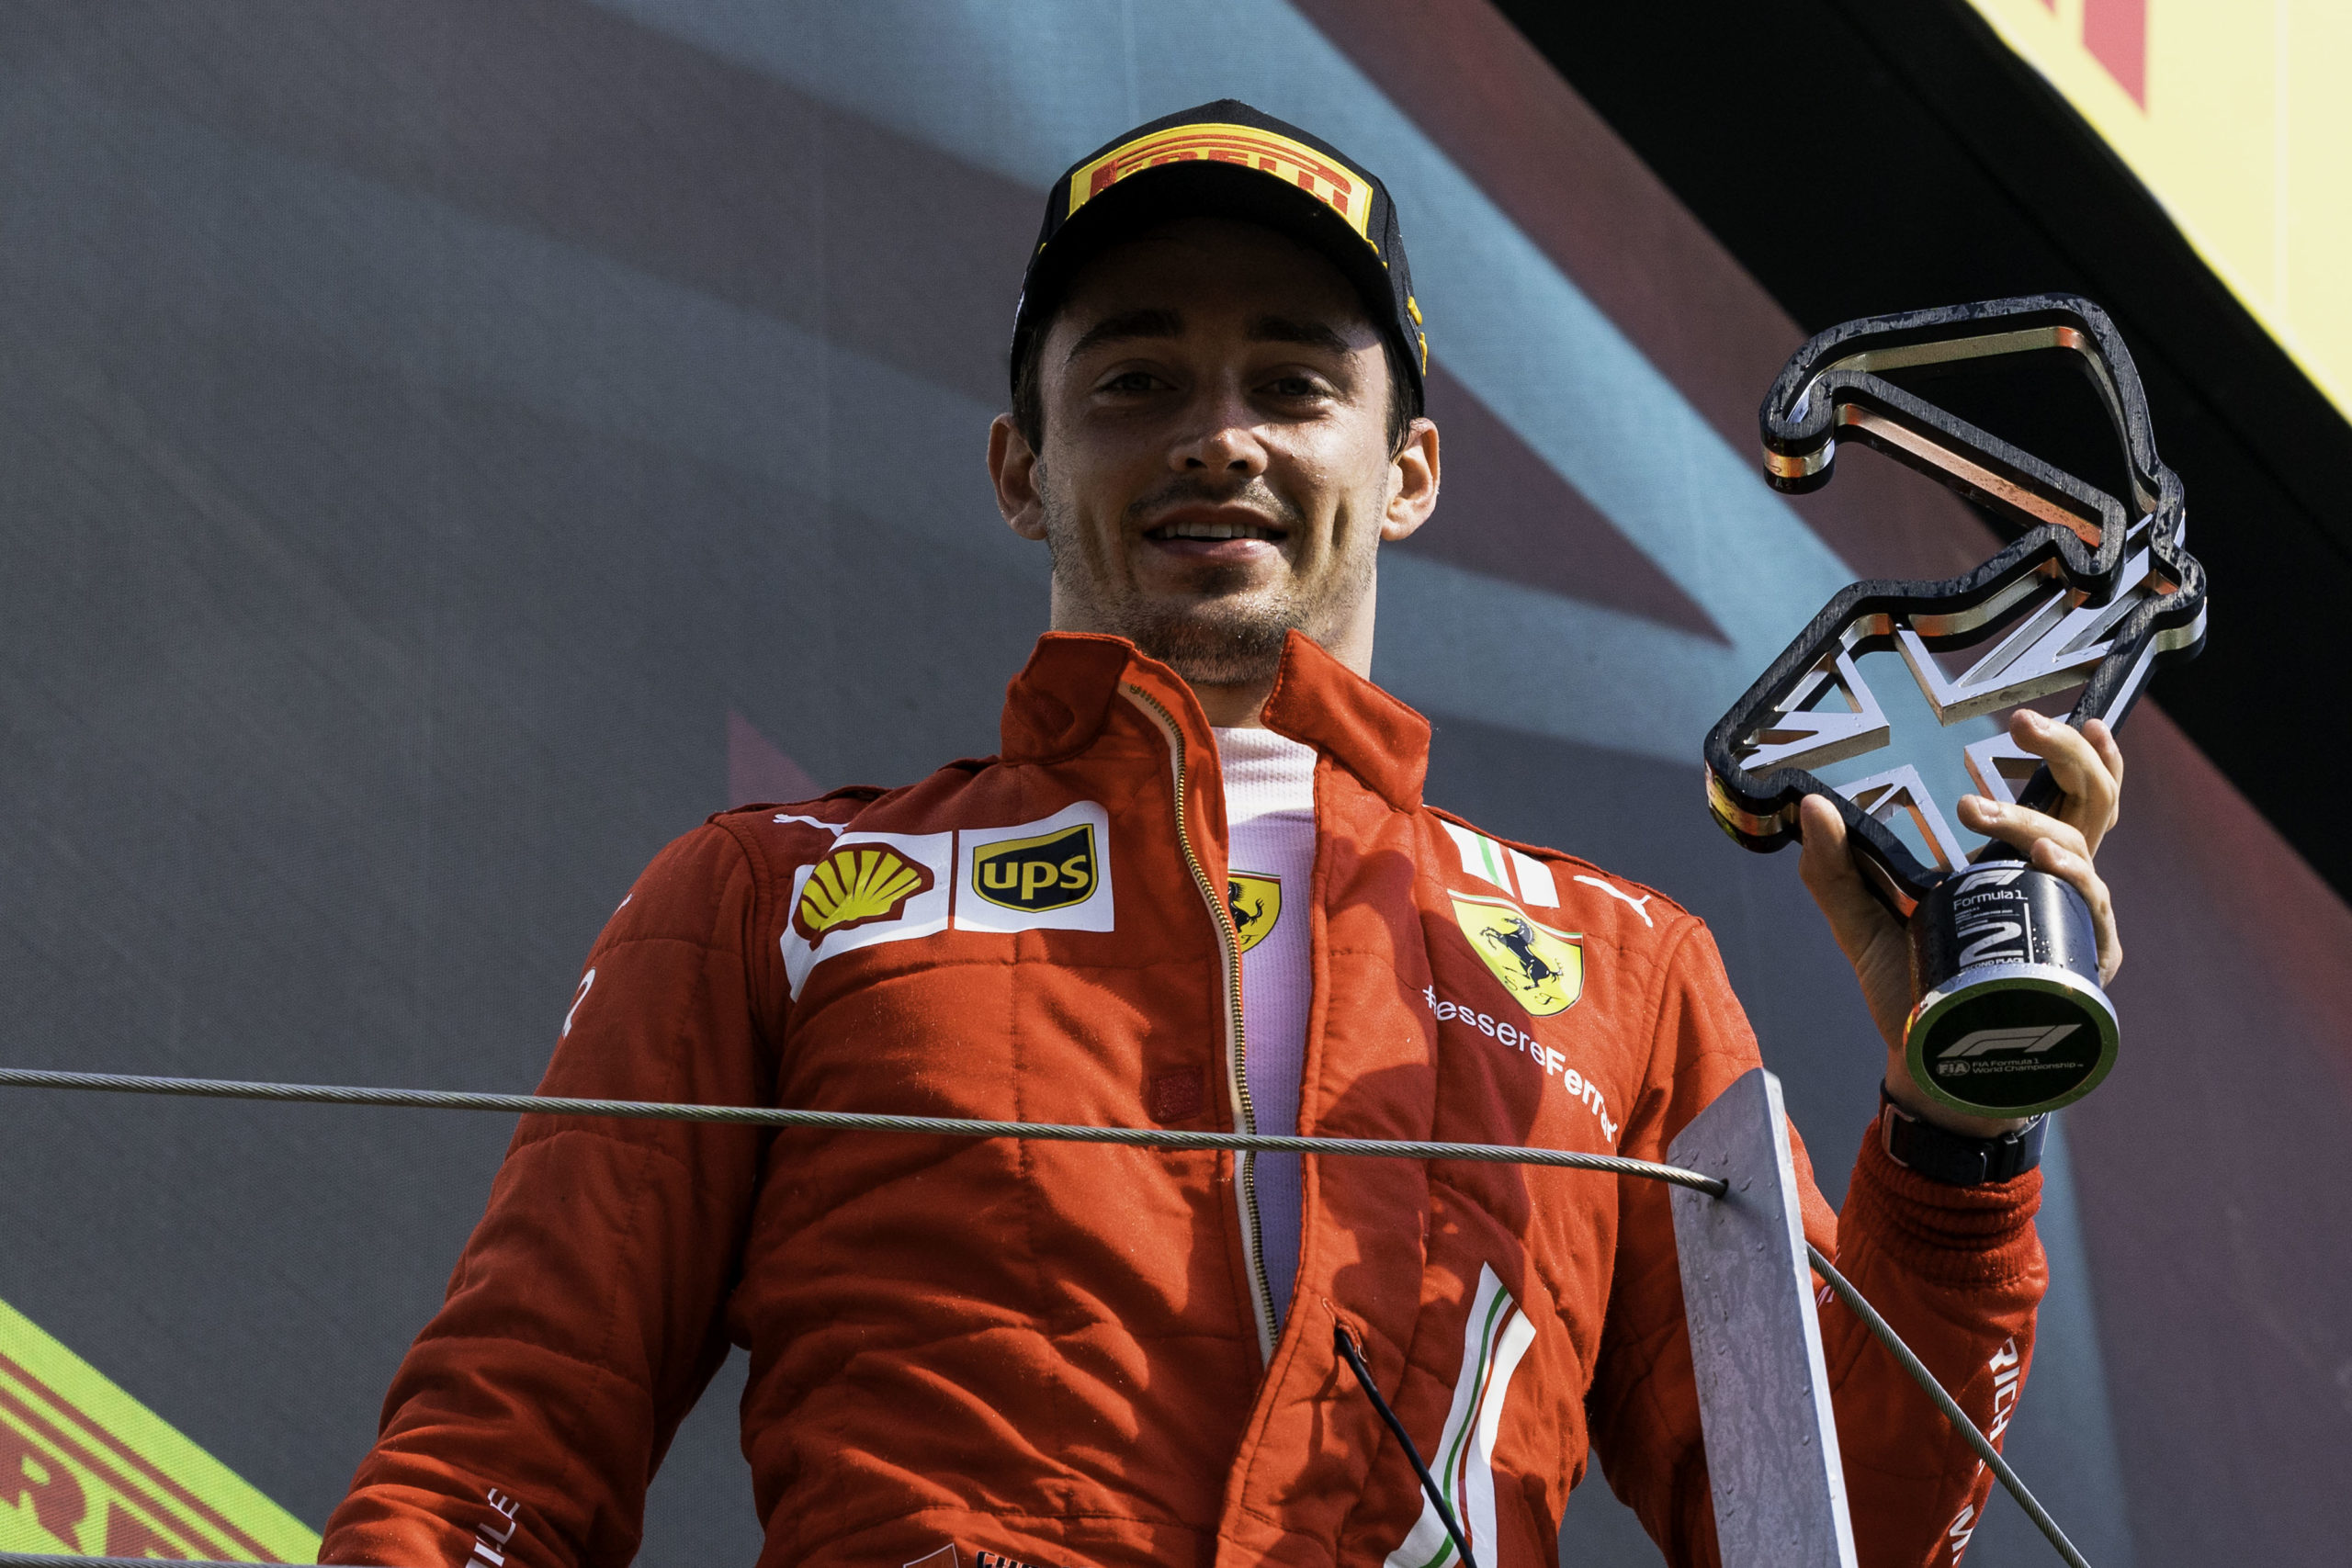 Podium For Charles Leclerc At Silverstone | F1 News